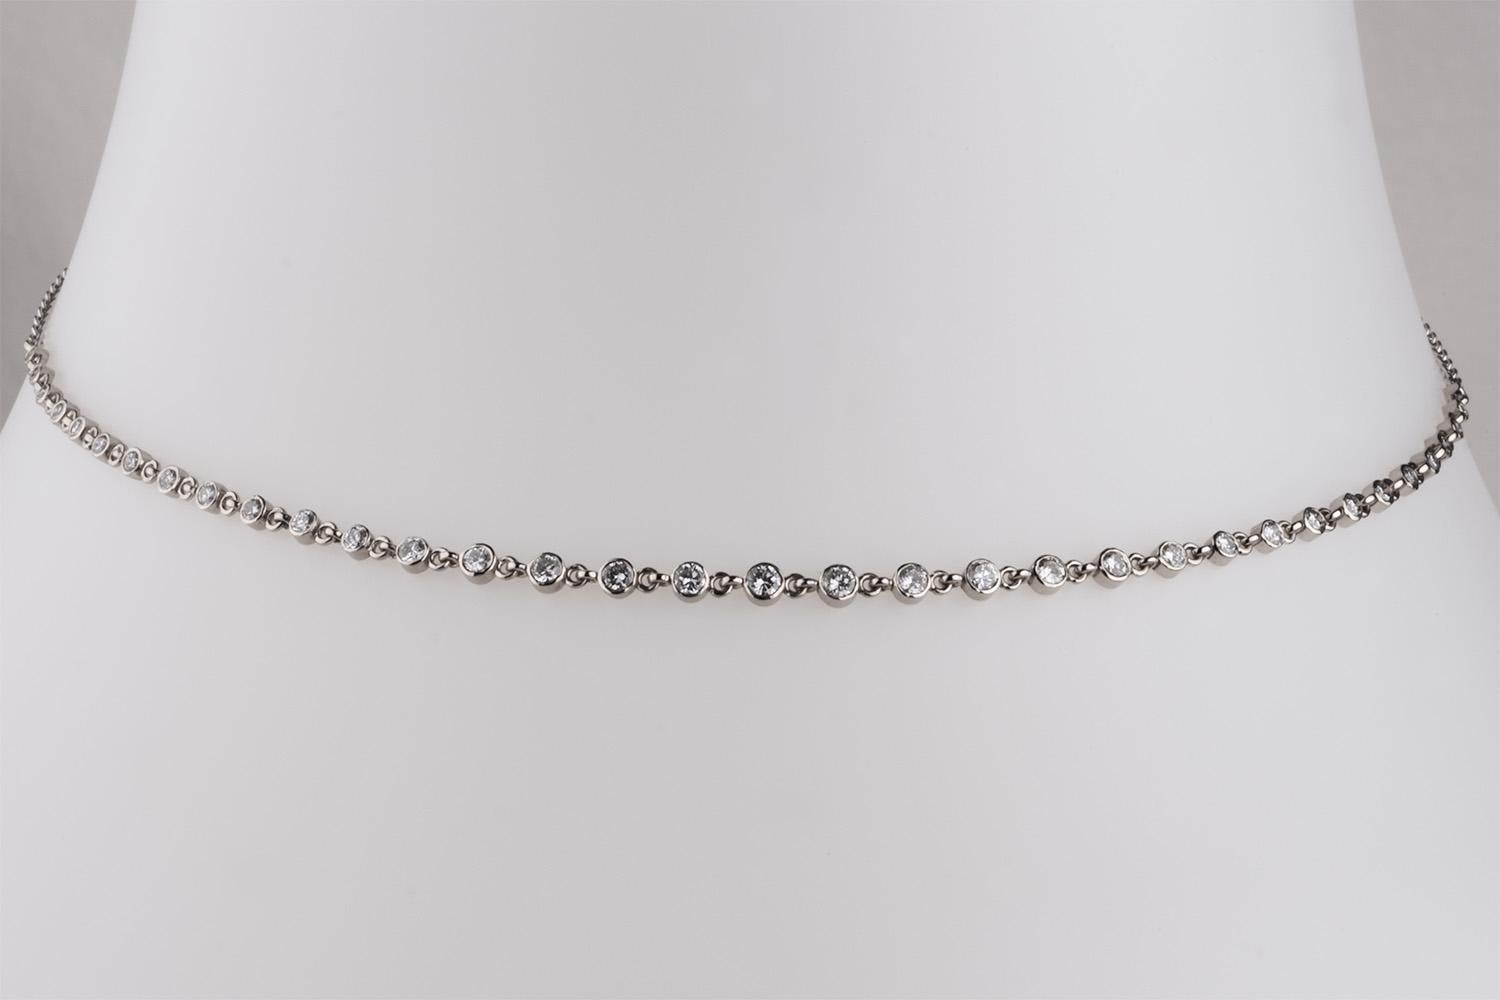 Reclaimed diamonds bezel set in 14 karat white gold creates a sparkly necklace that simply goes with everything.
Featuring 1.35 carats of diamonds that graduate in size as they move towards the centre of the chain. 
Designed to fit near your